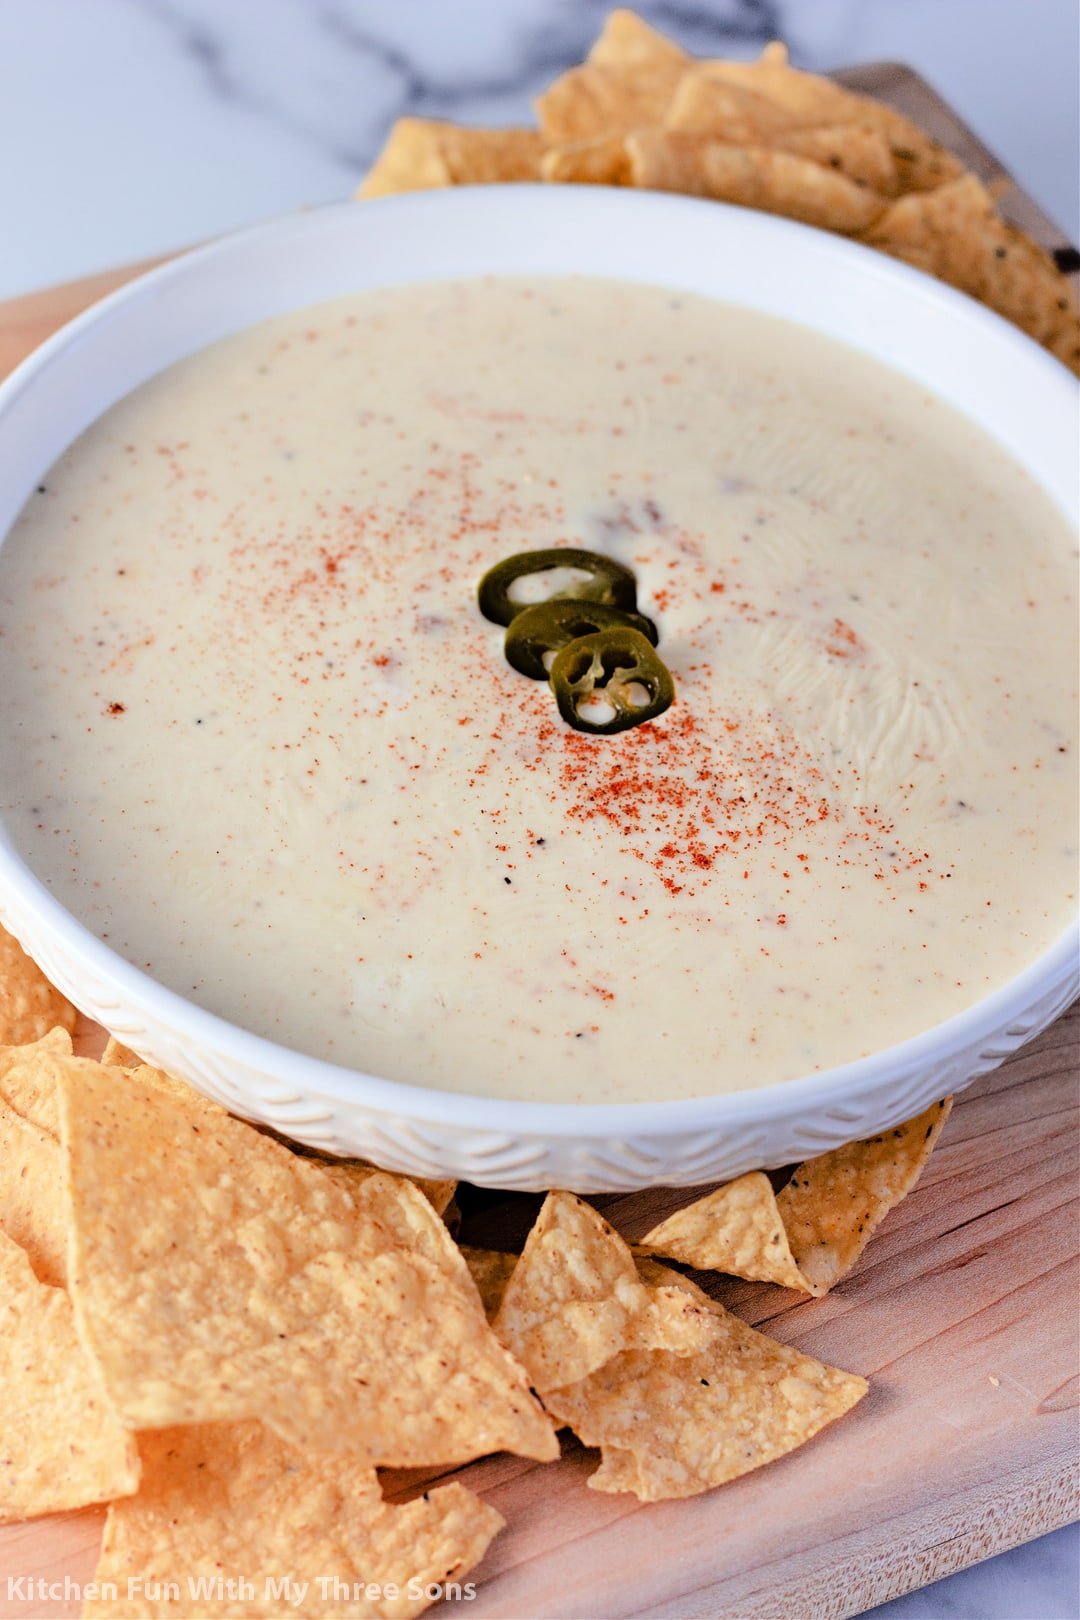 The Best White Queso Dip - Kitchen Fun With My 3 Sons